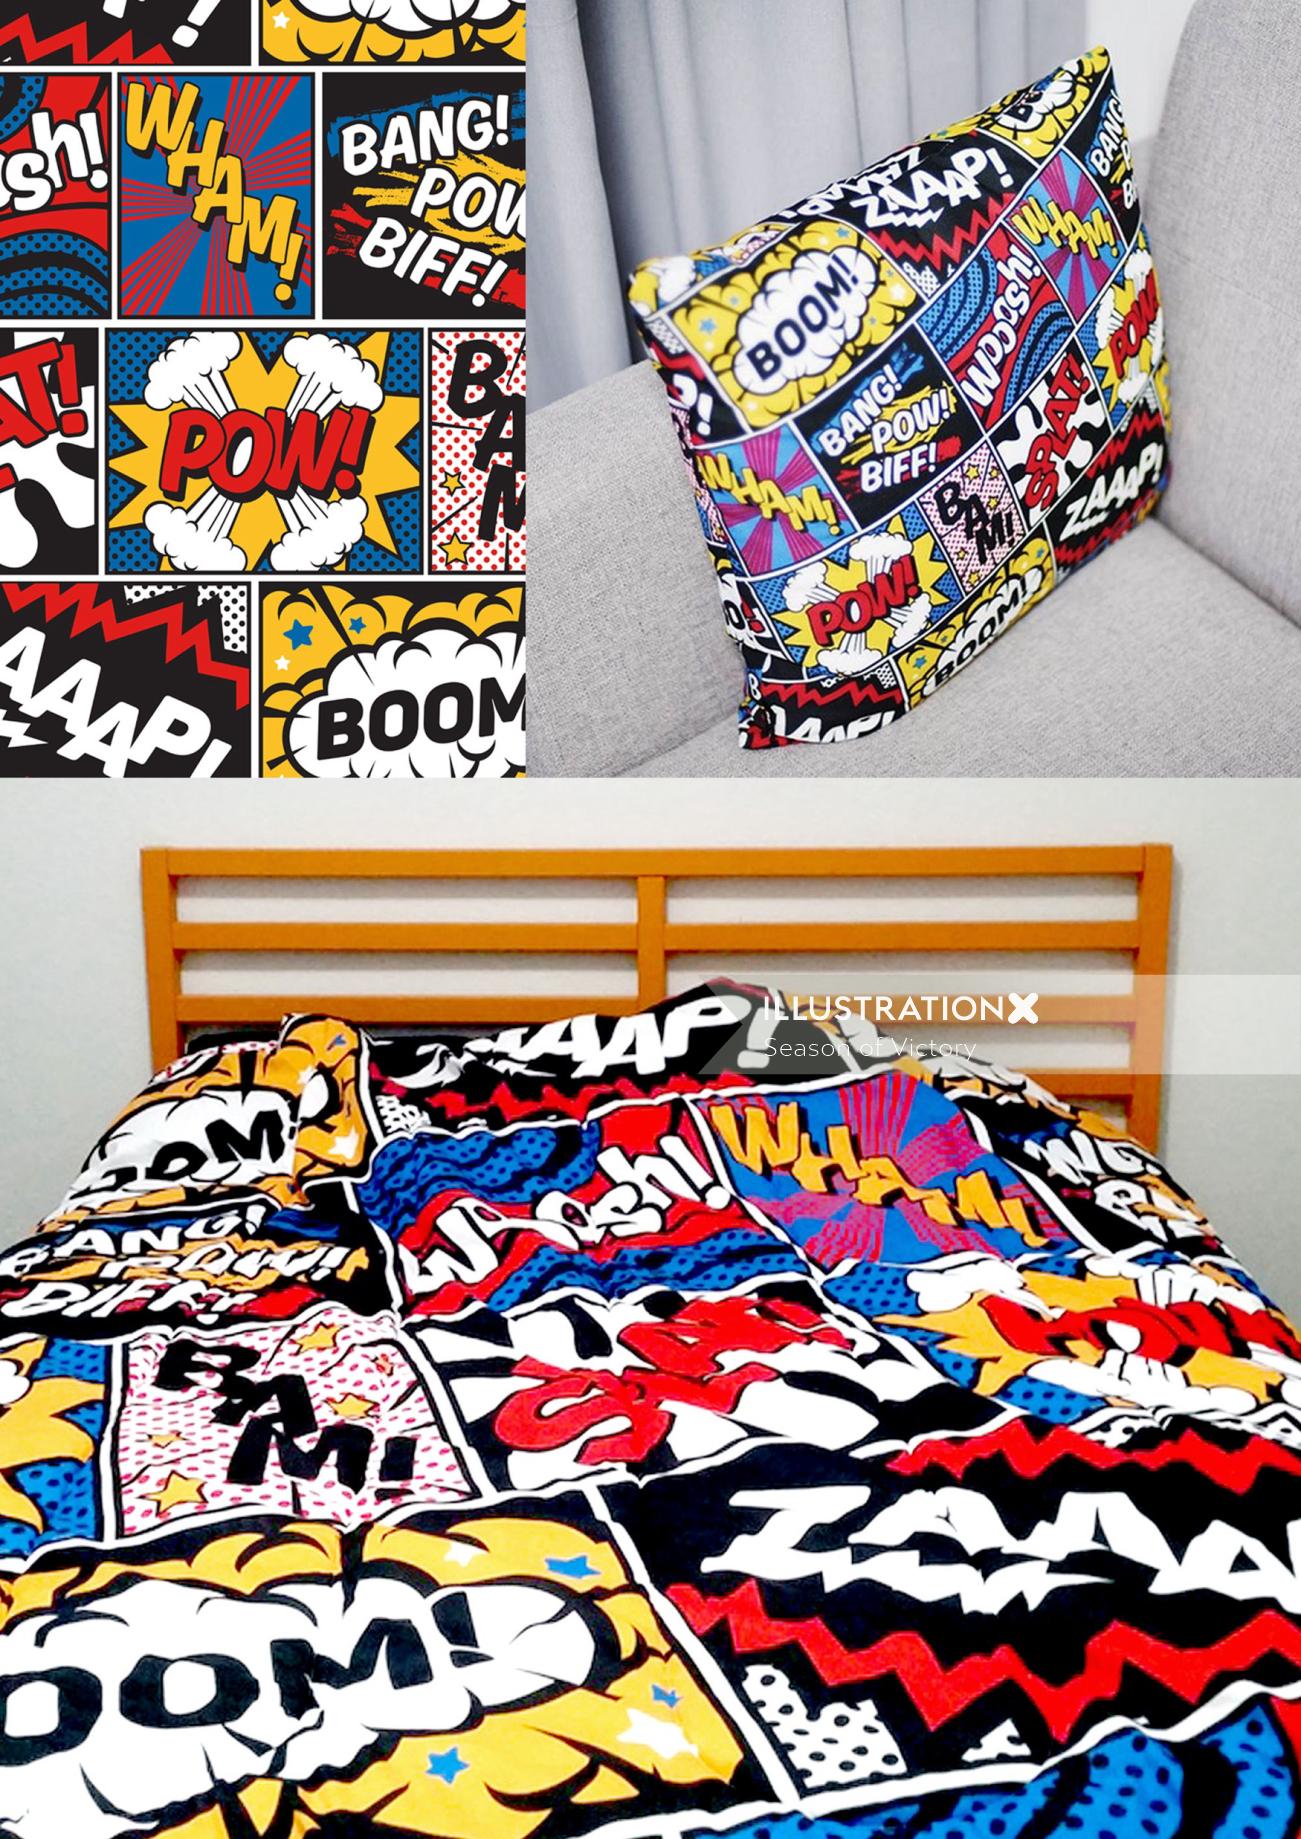 For the product, there is pop art and comic book art